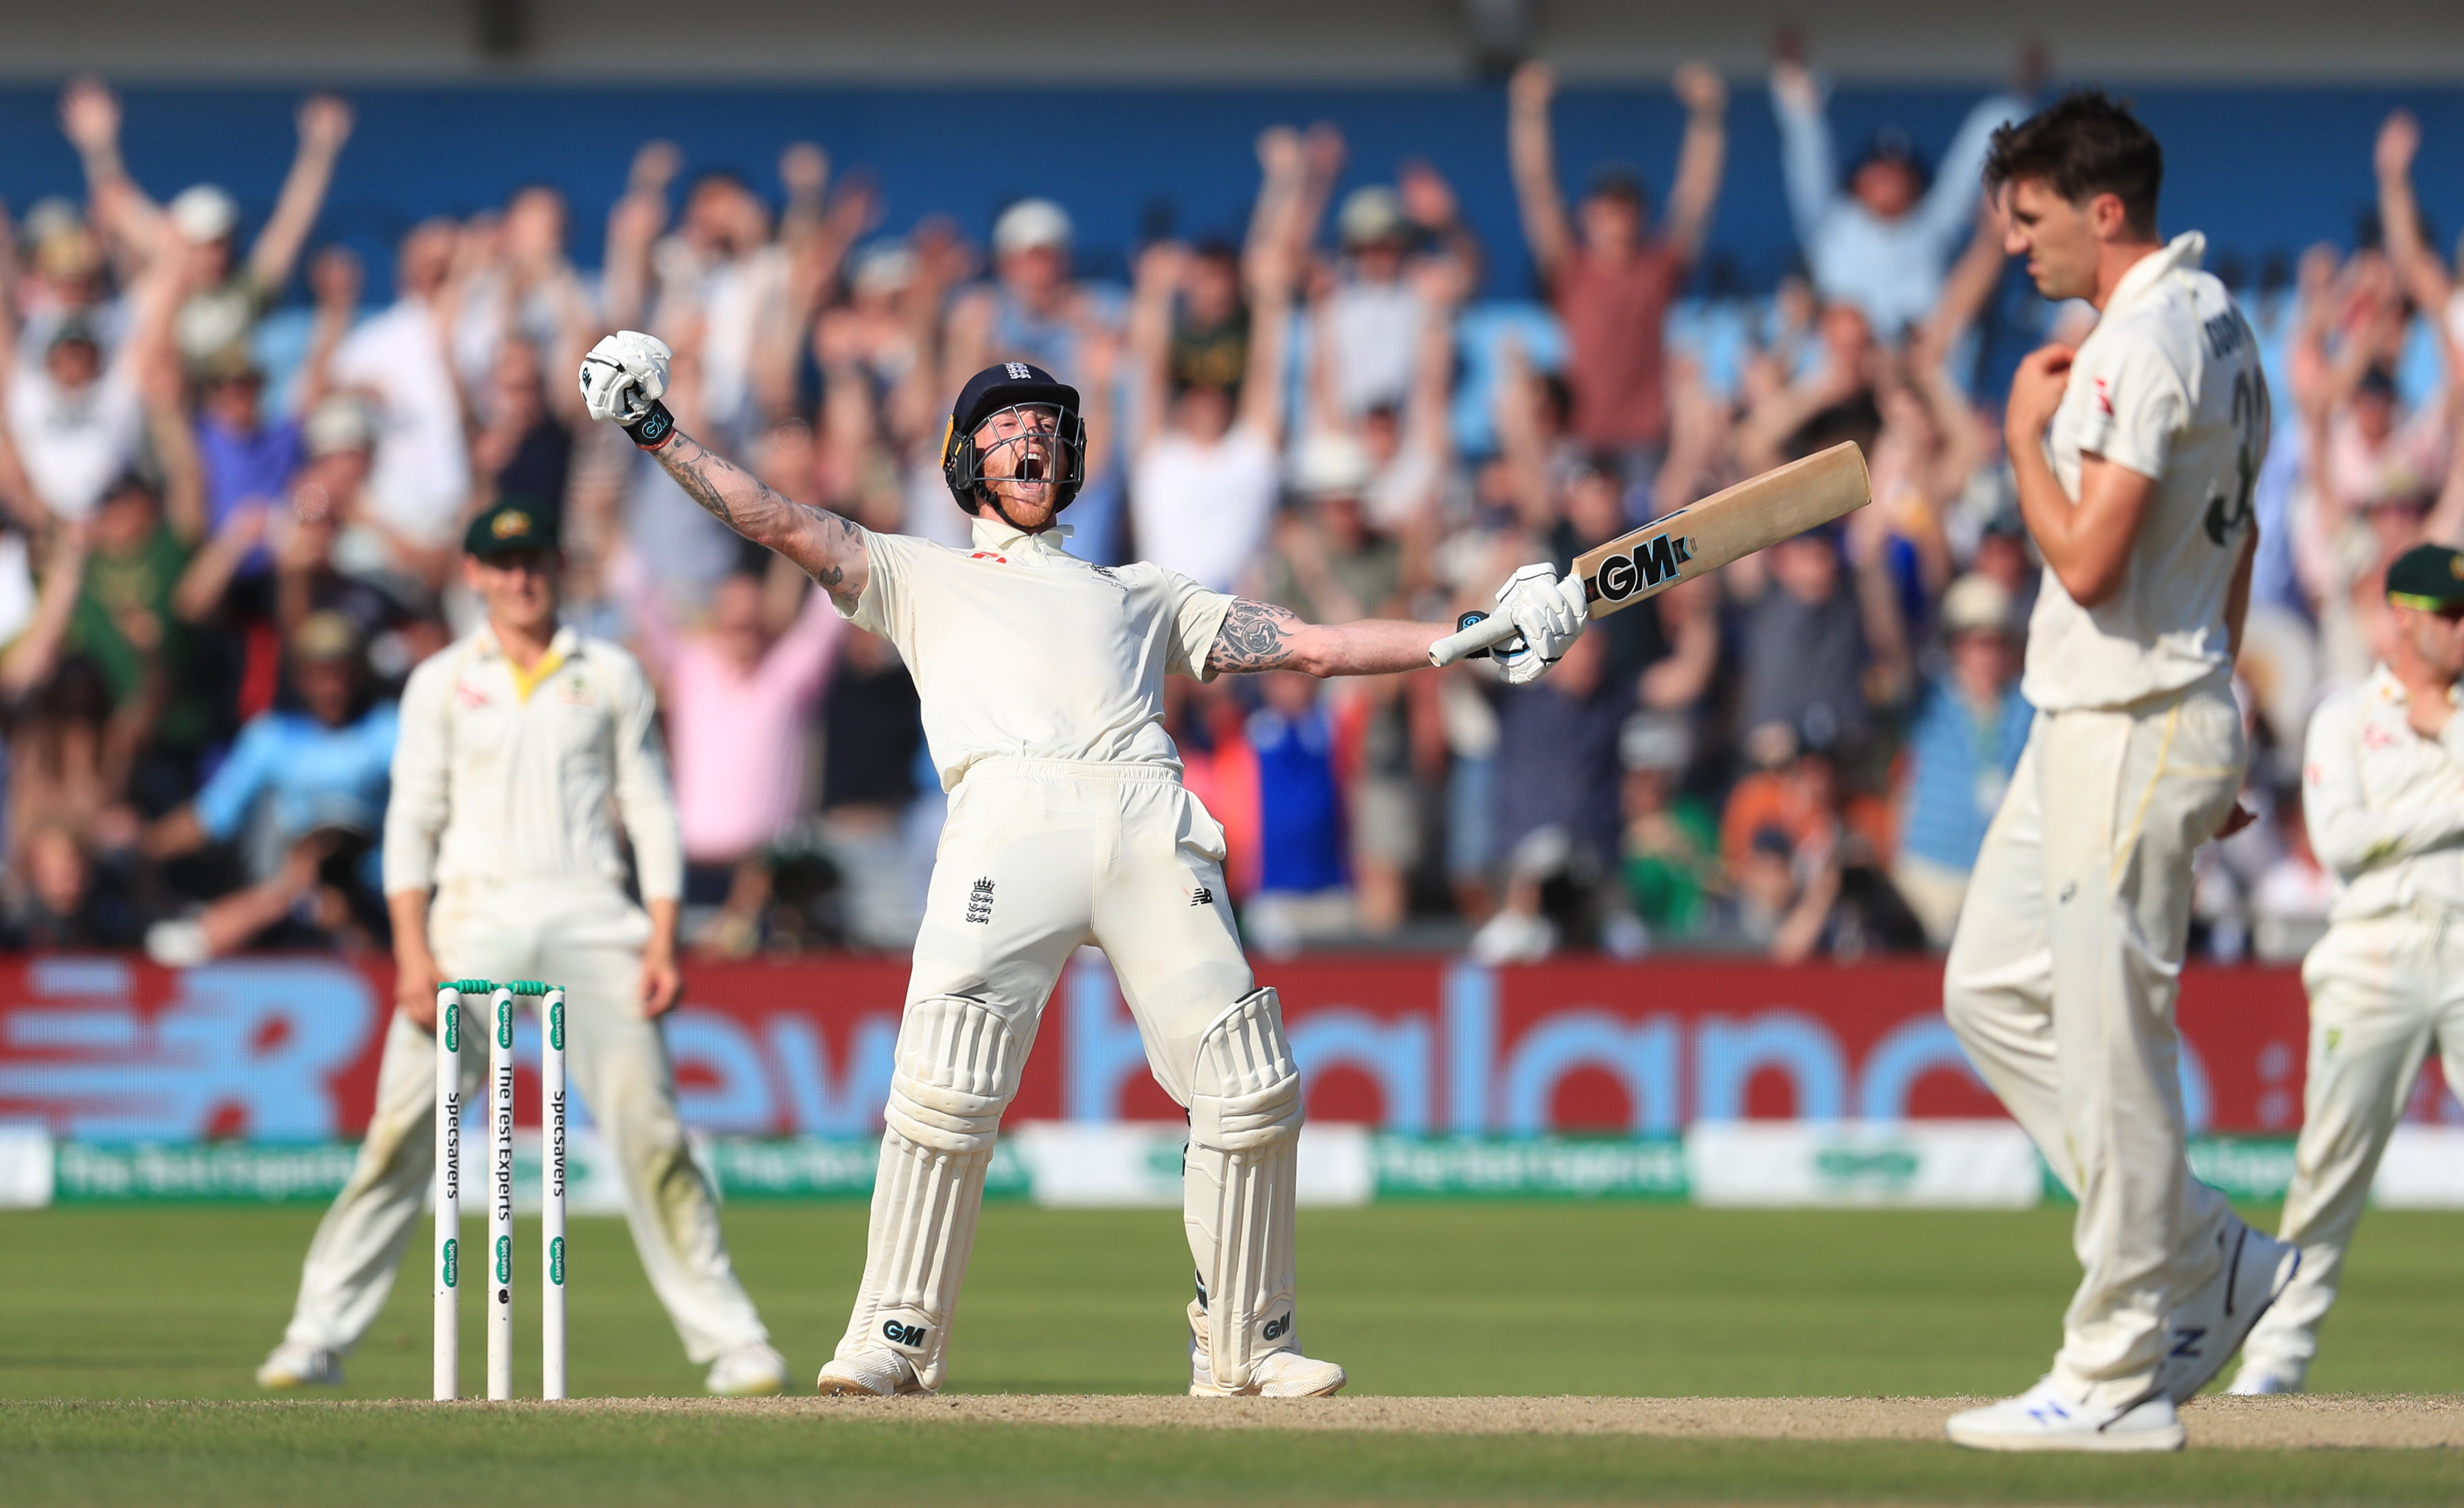 Ben Stokes celebrated winning the third Ashes Test match at Headingley in 2019 (Mike Egerton/PA)